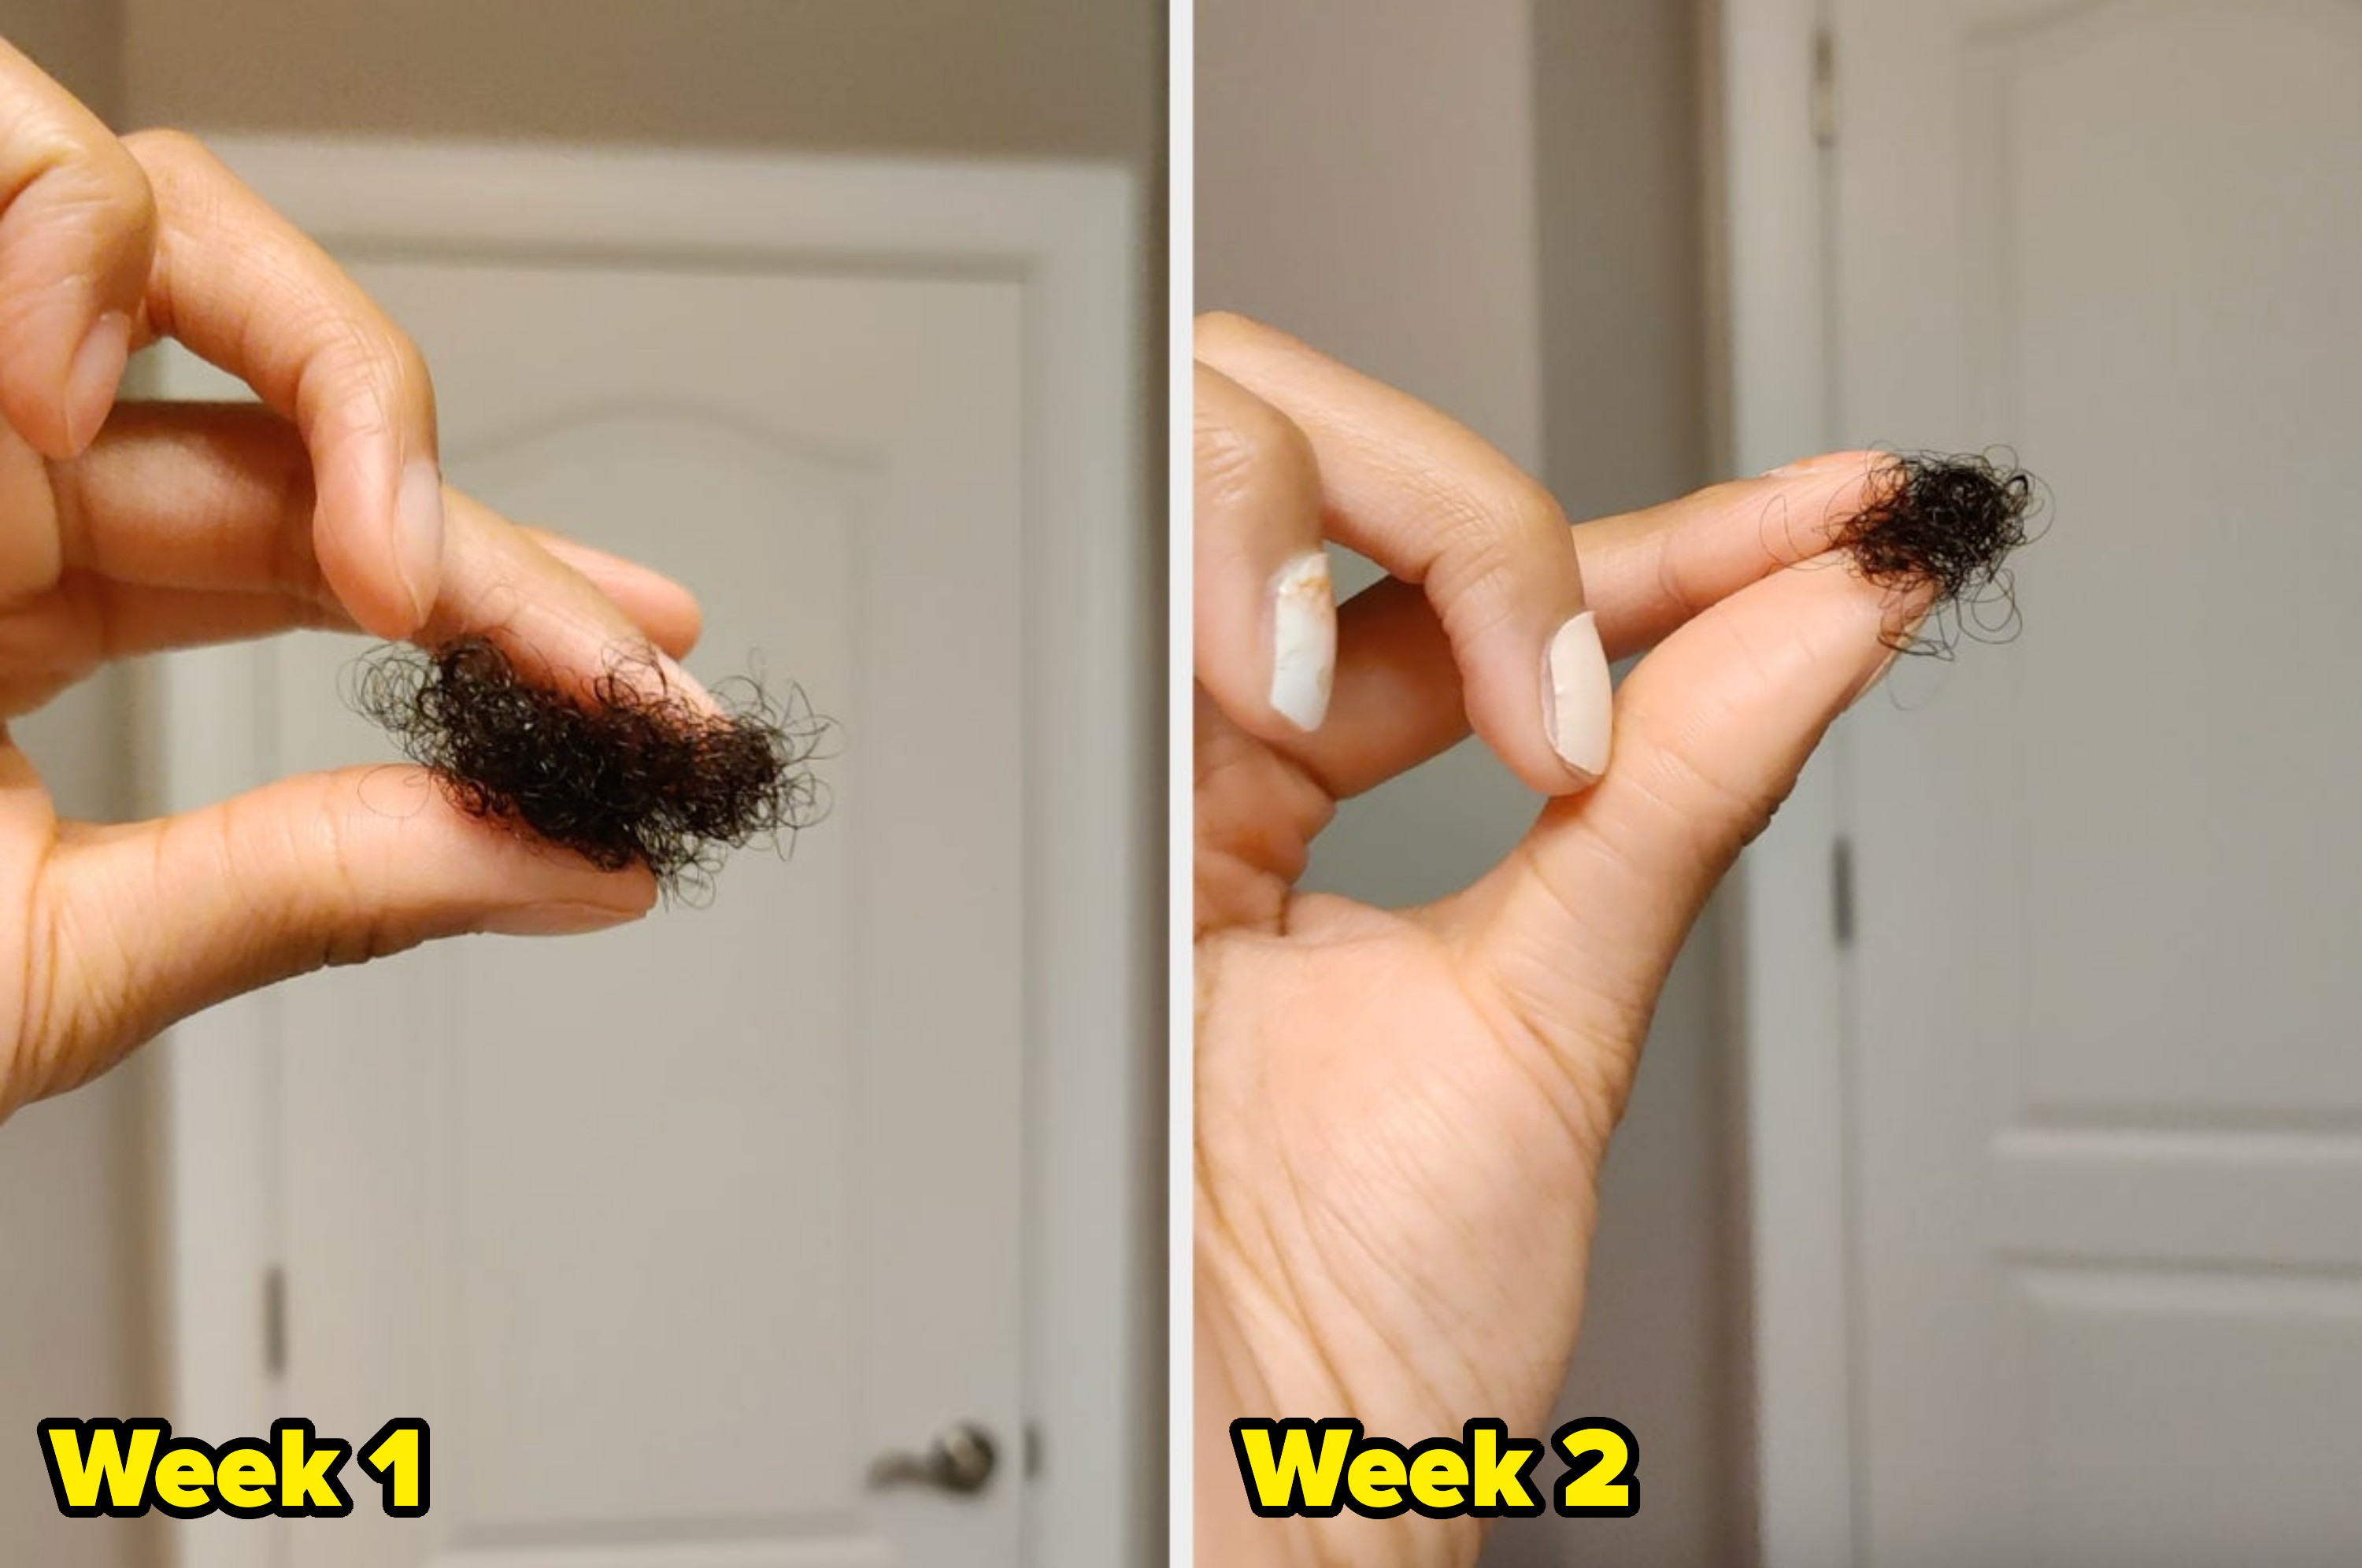 A before and after: Hand holding a larger clump of hair Week 1 then a smaller clump of hair Week 2